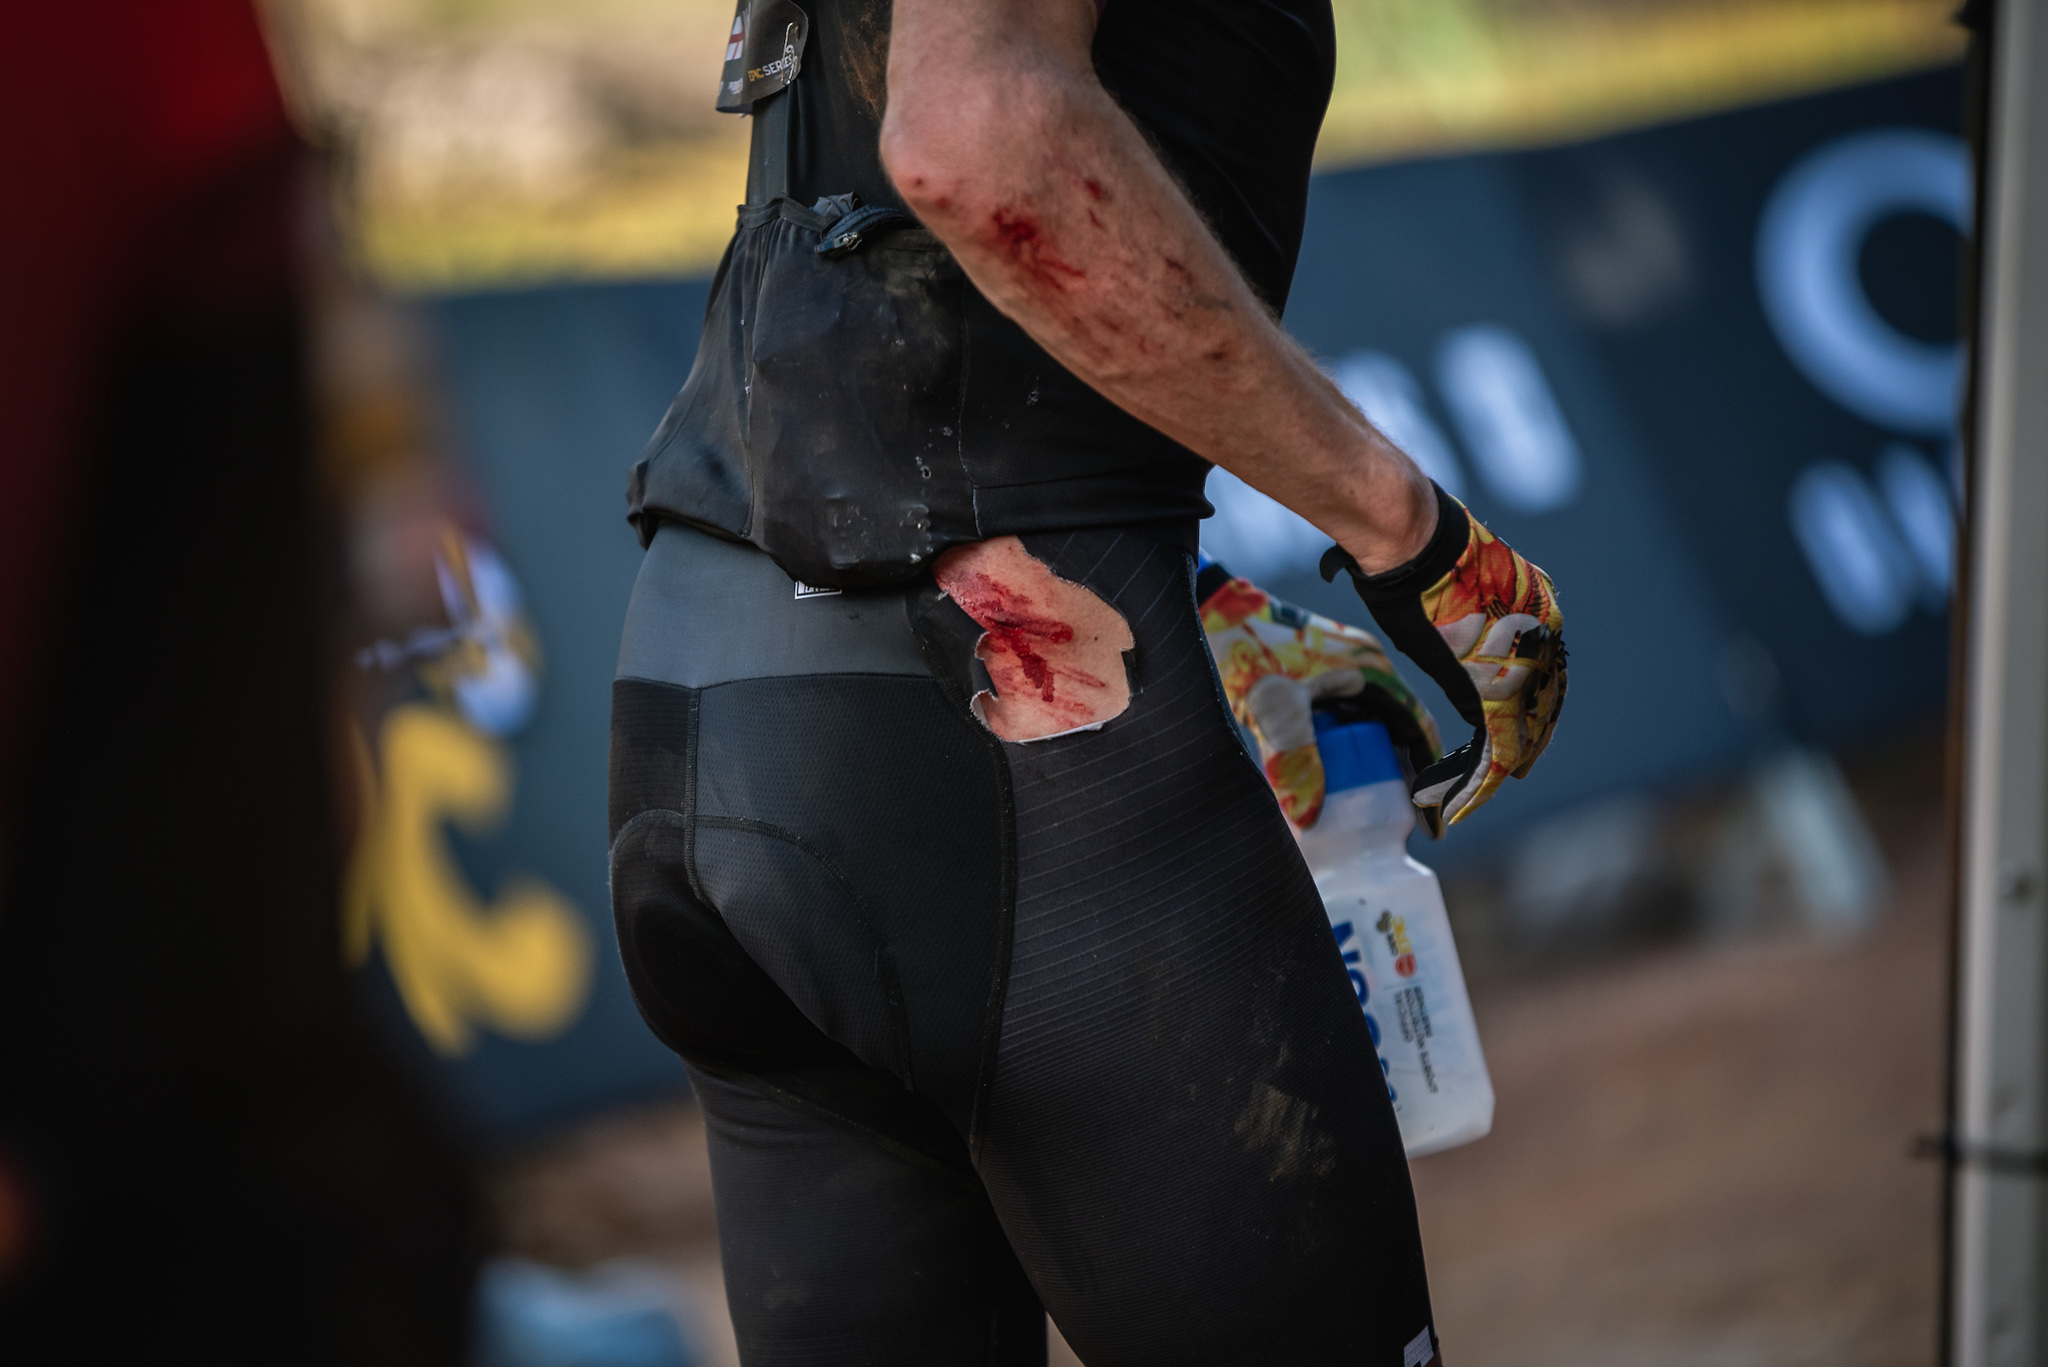 Copyright Justin Coomber/Cape Epic